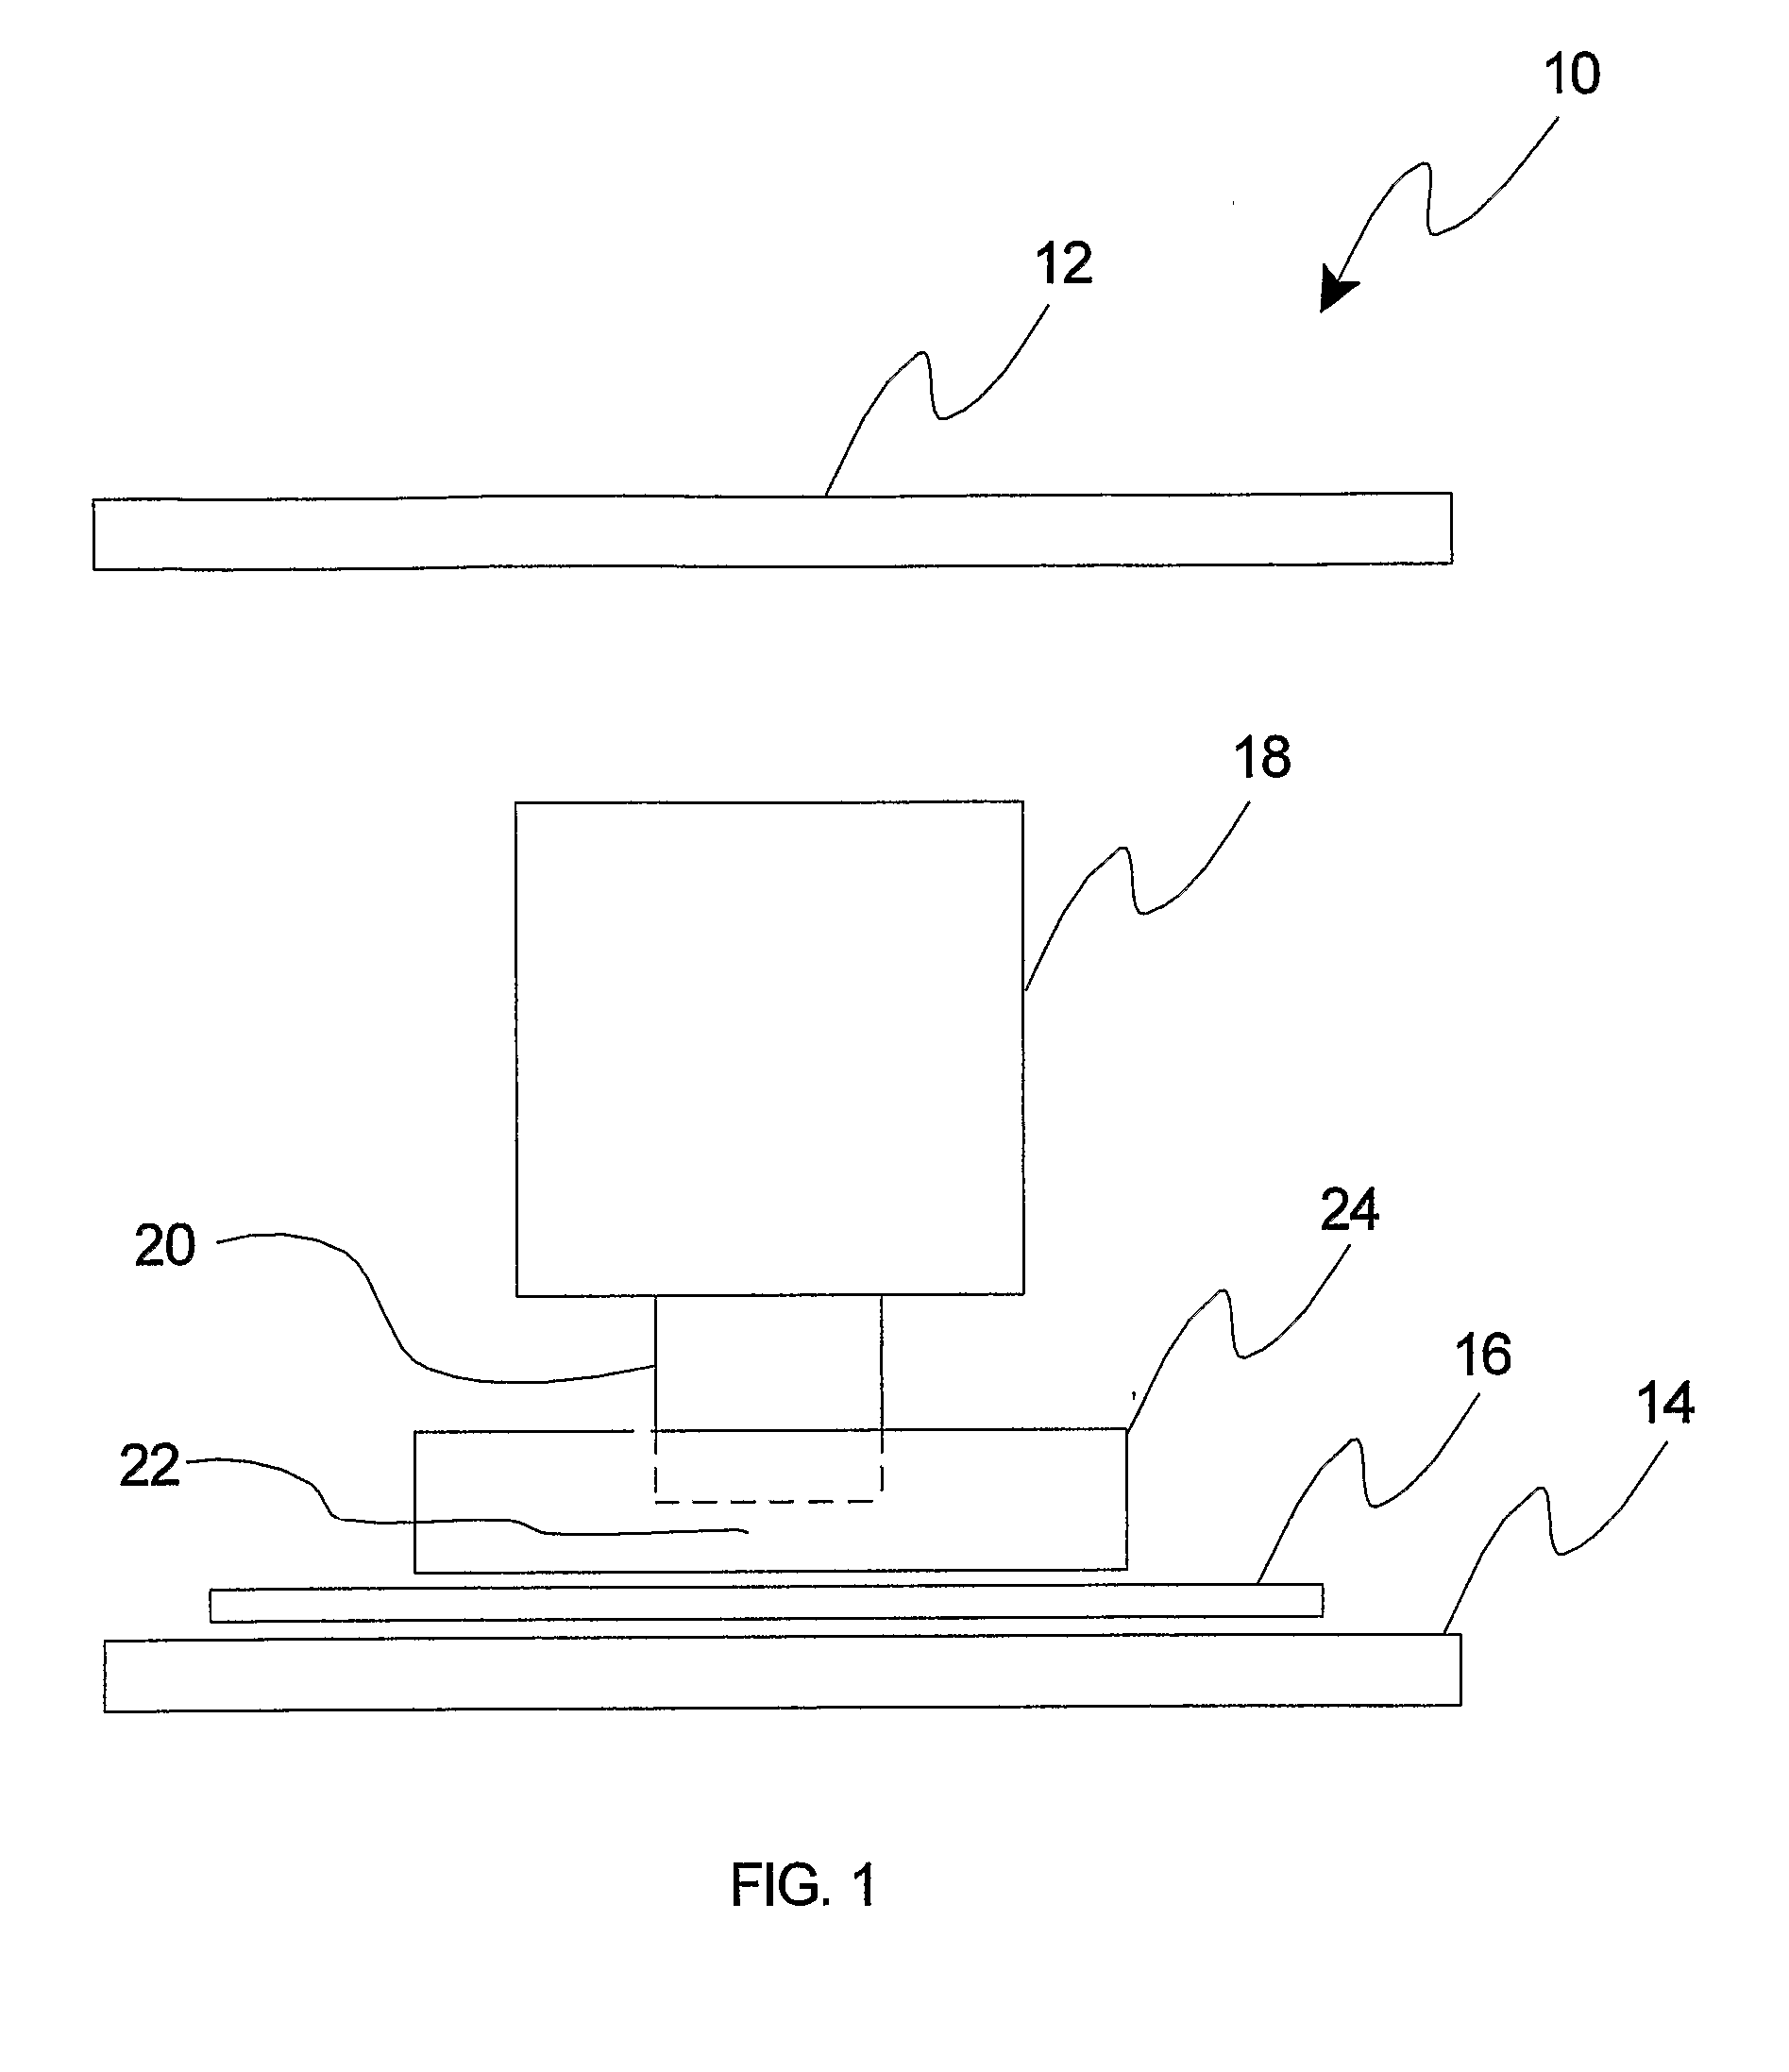 Dynamic fluid control system for immersion lithography